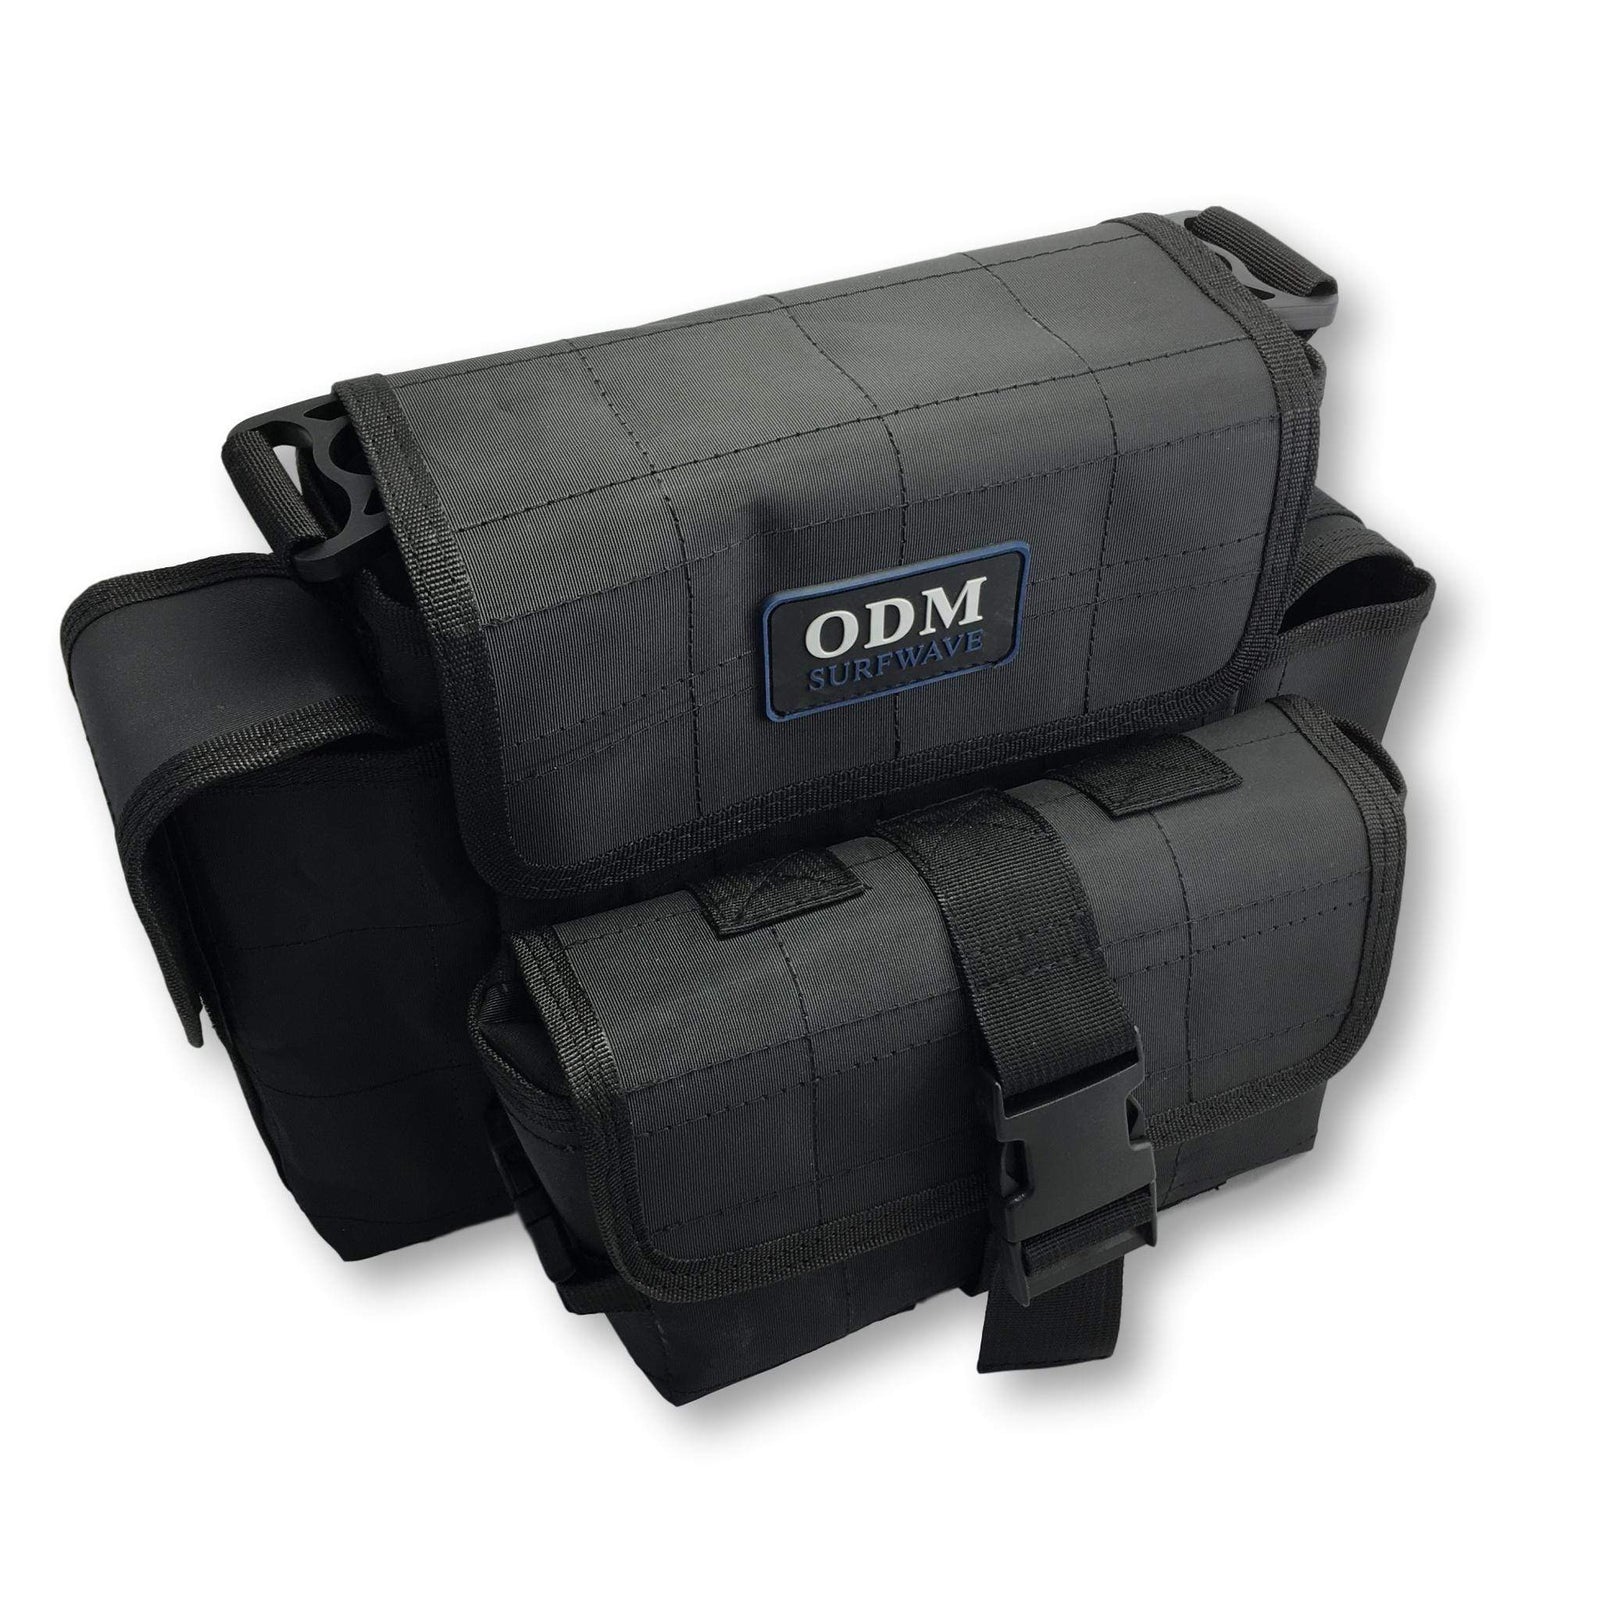 ODM Fishing Tagged surf-bags - The Saltwater Edge